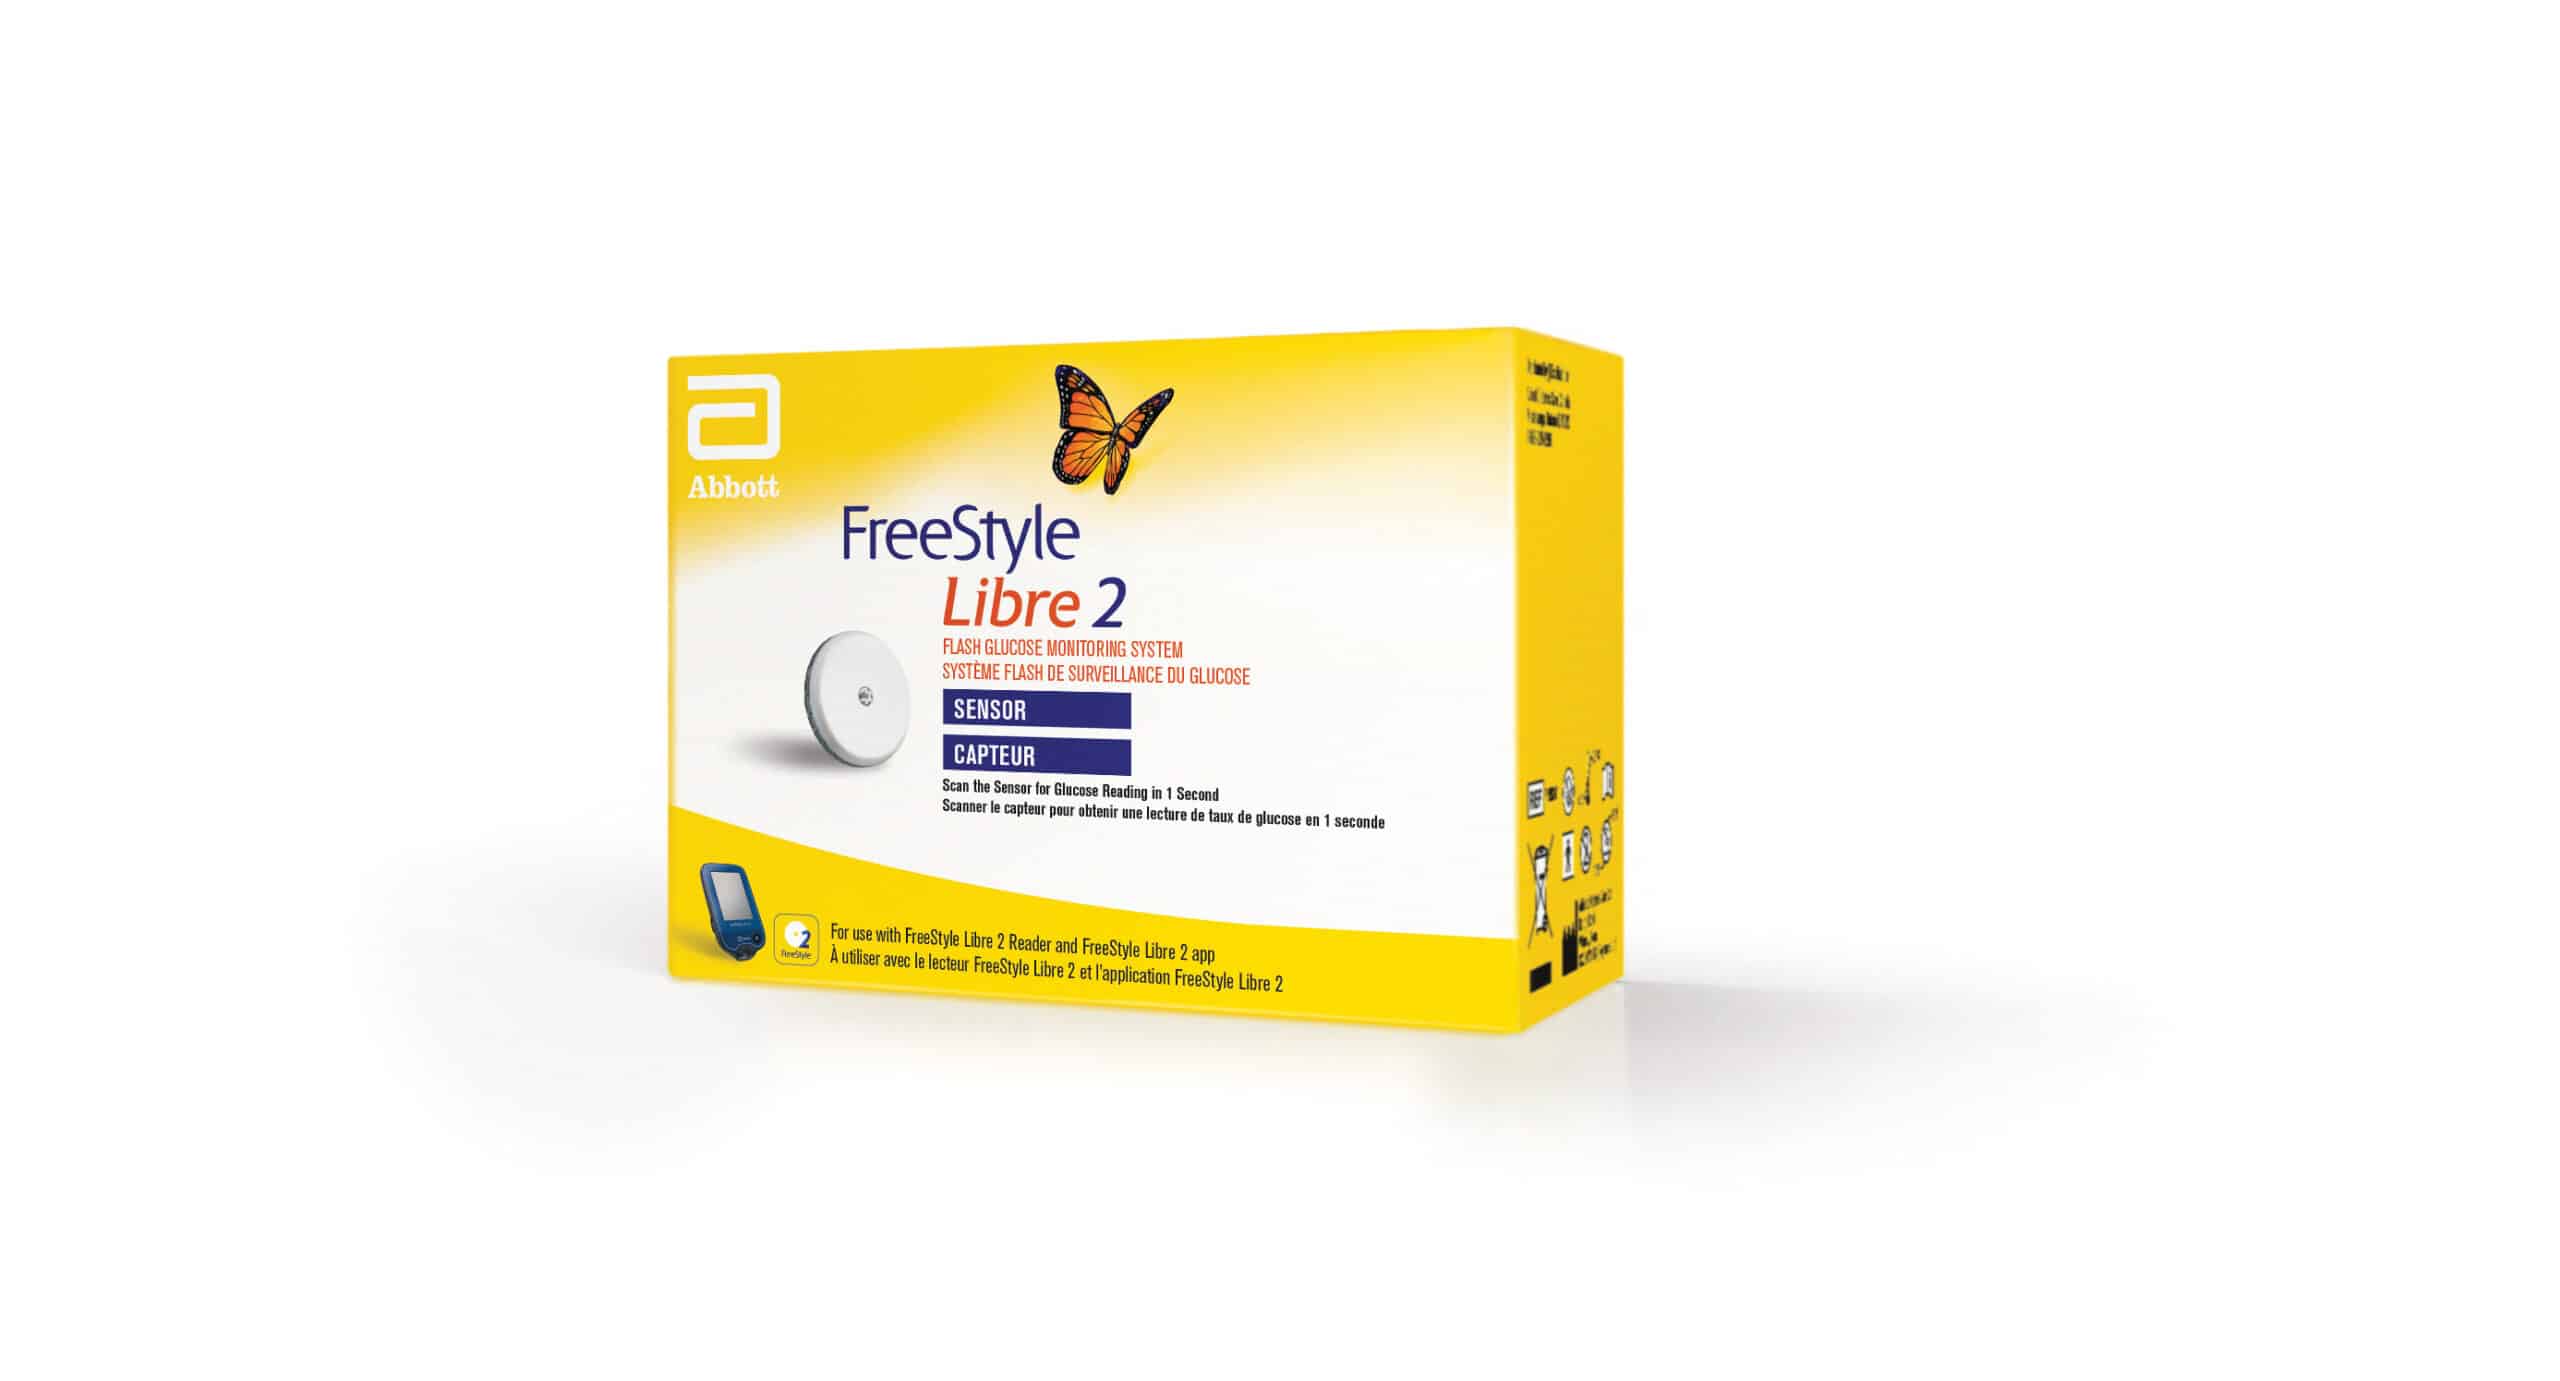 Freestyle Libre online  FreeStyle Libre 2 Sensors Glucose Monitoring